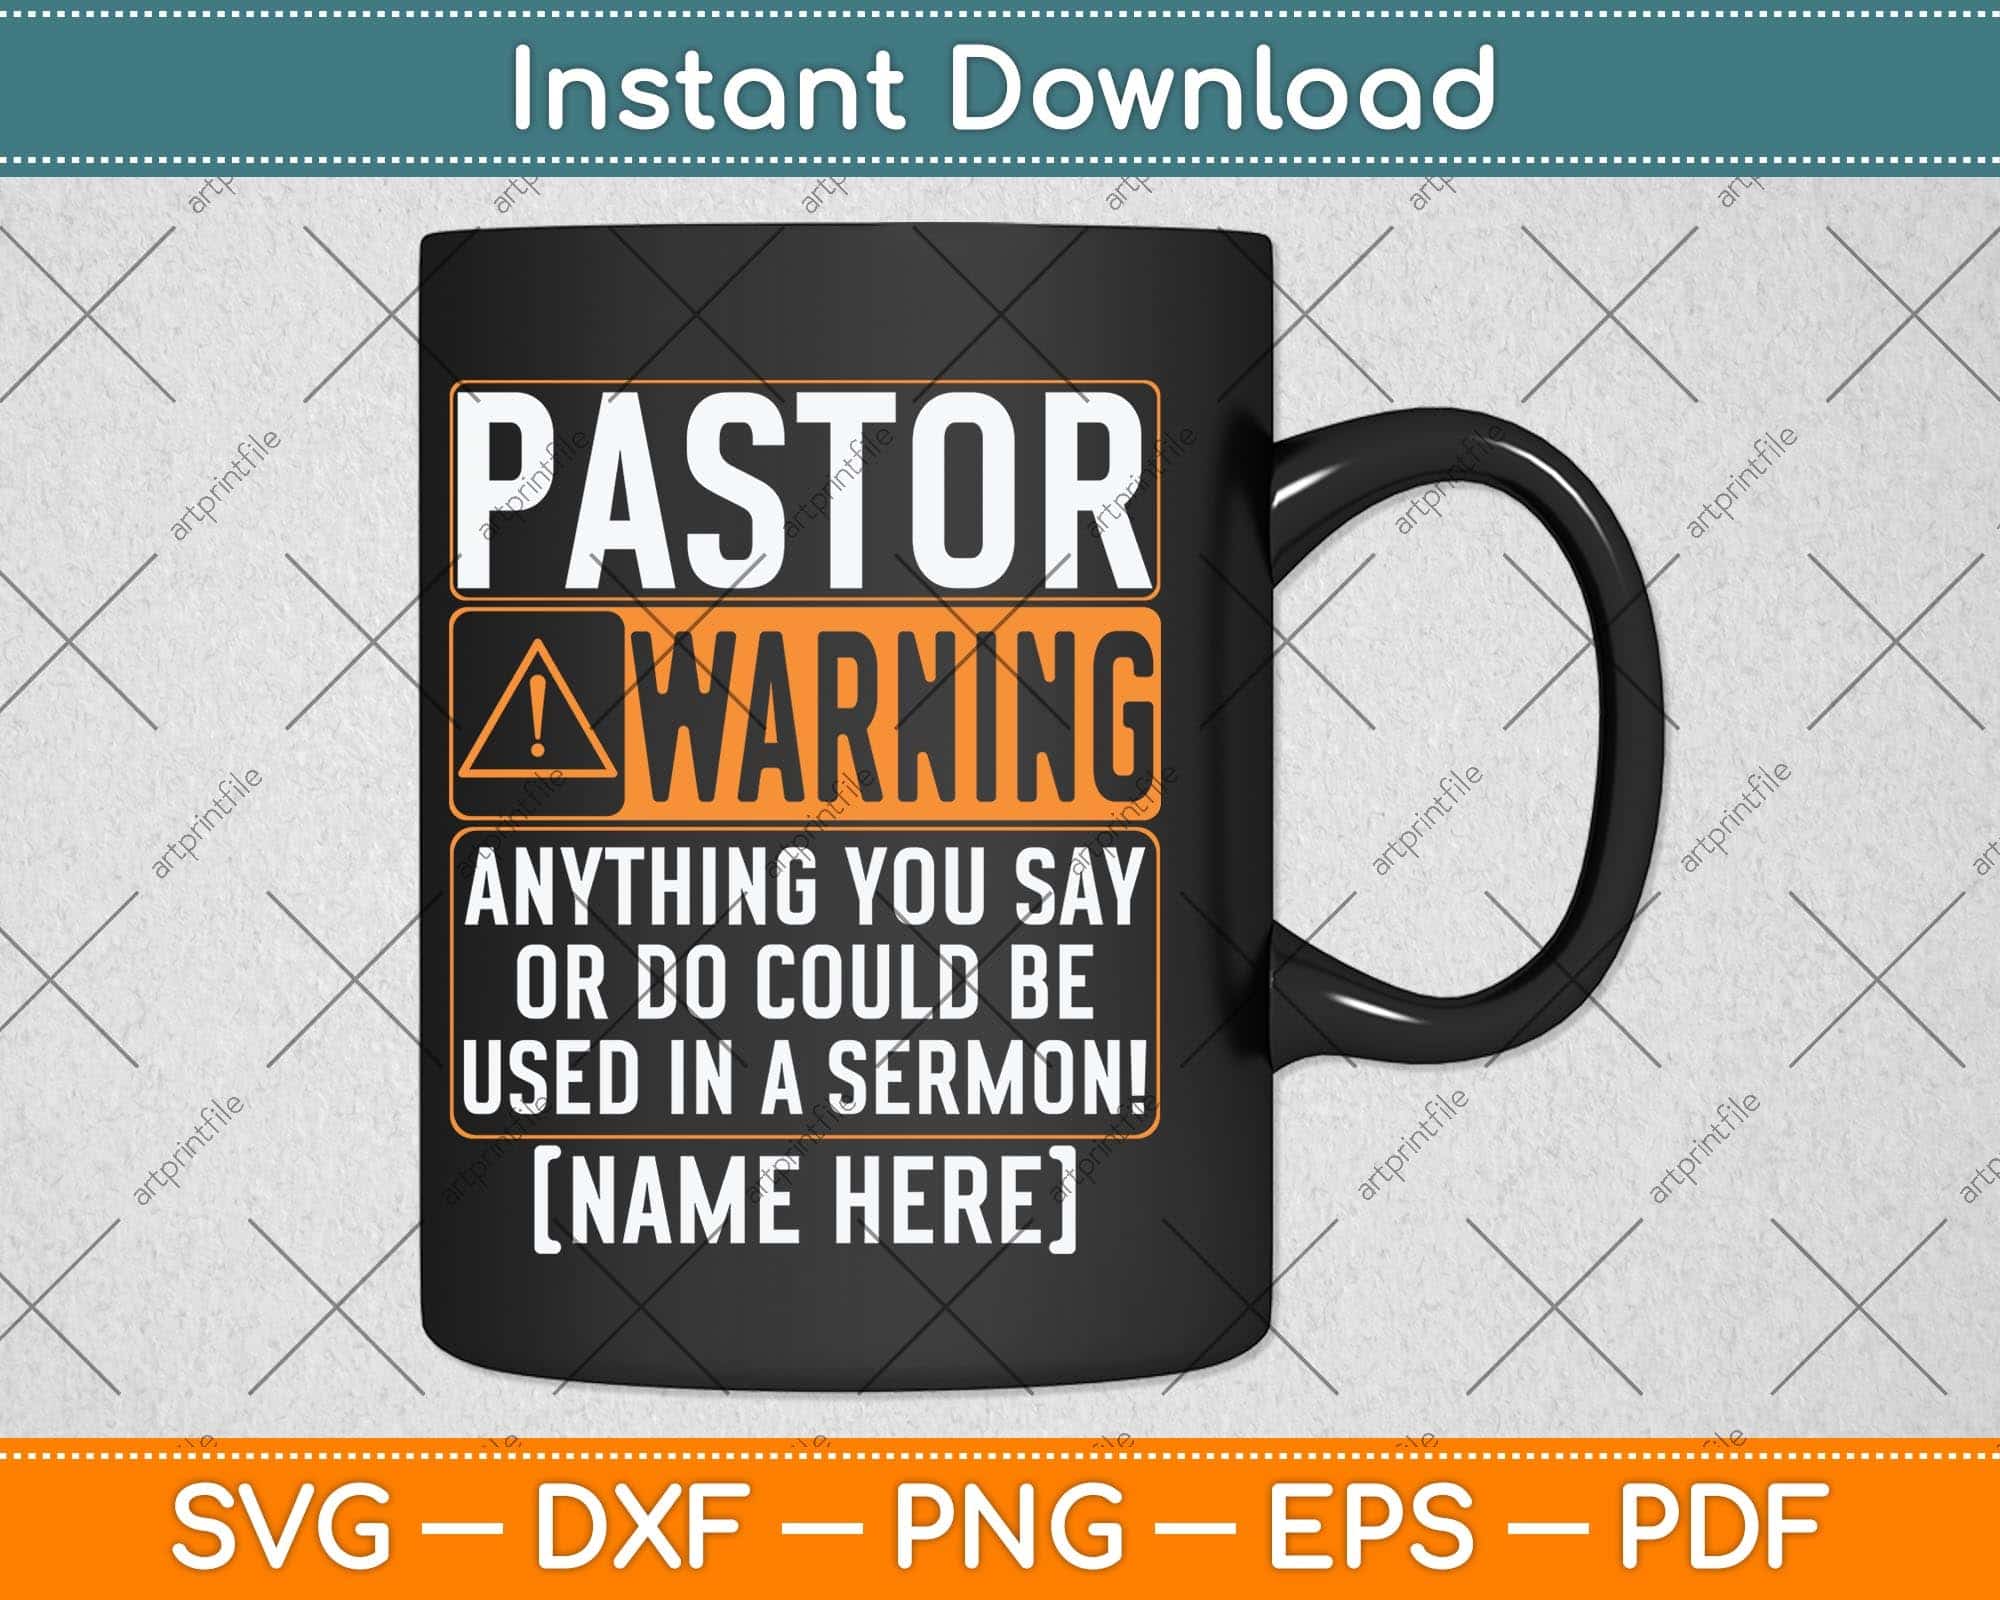  Pastor Warning Anything You Say Or Do Could Be Used in